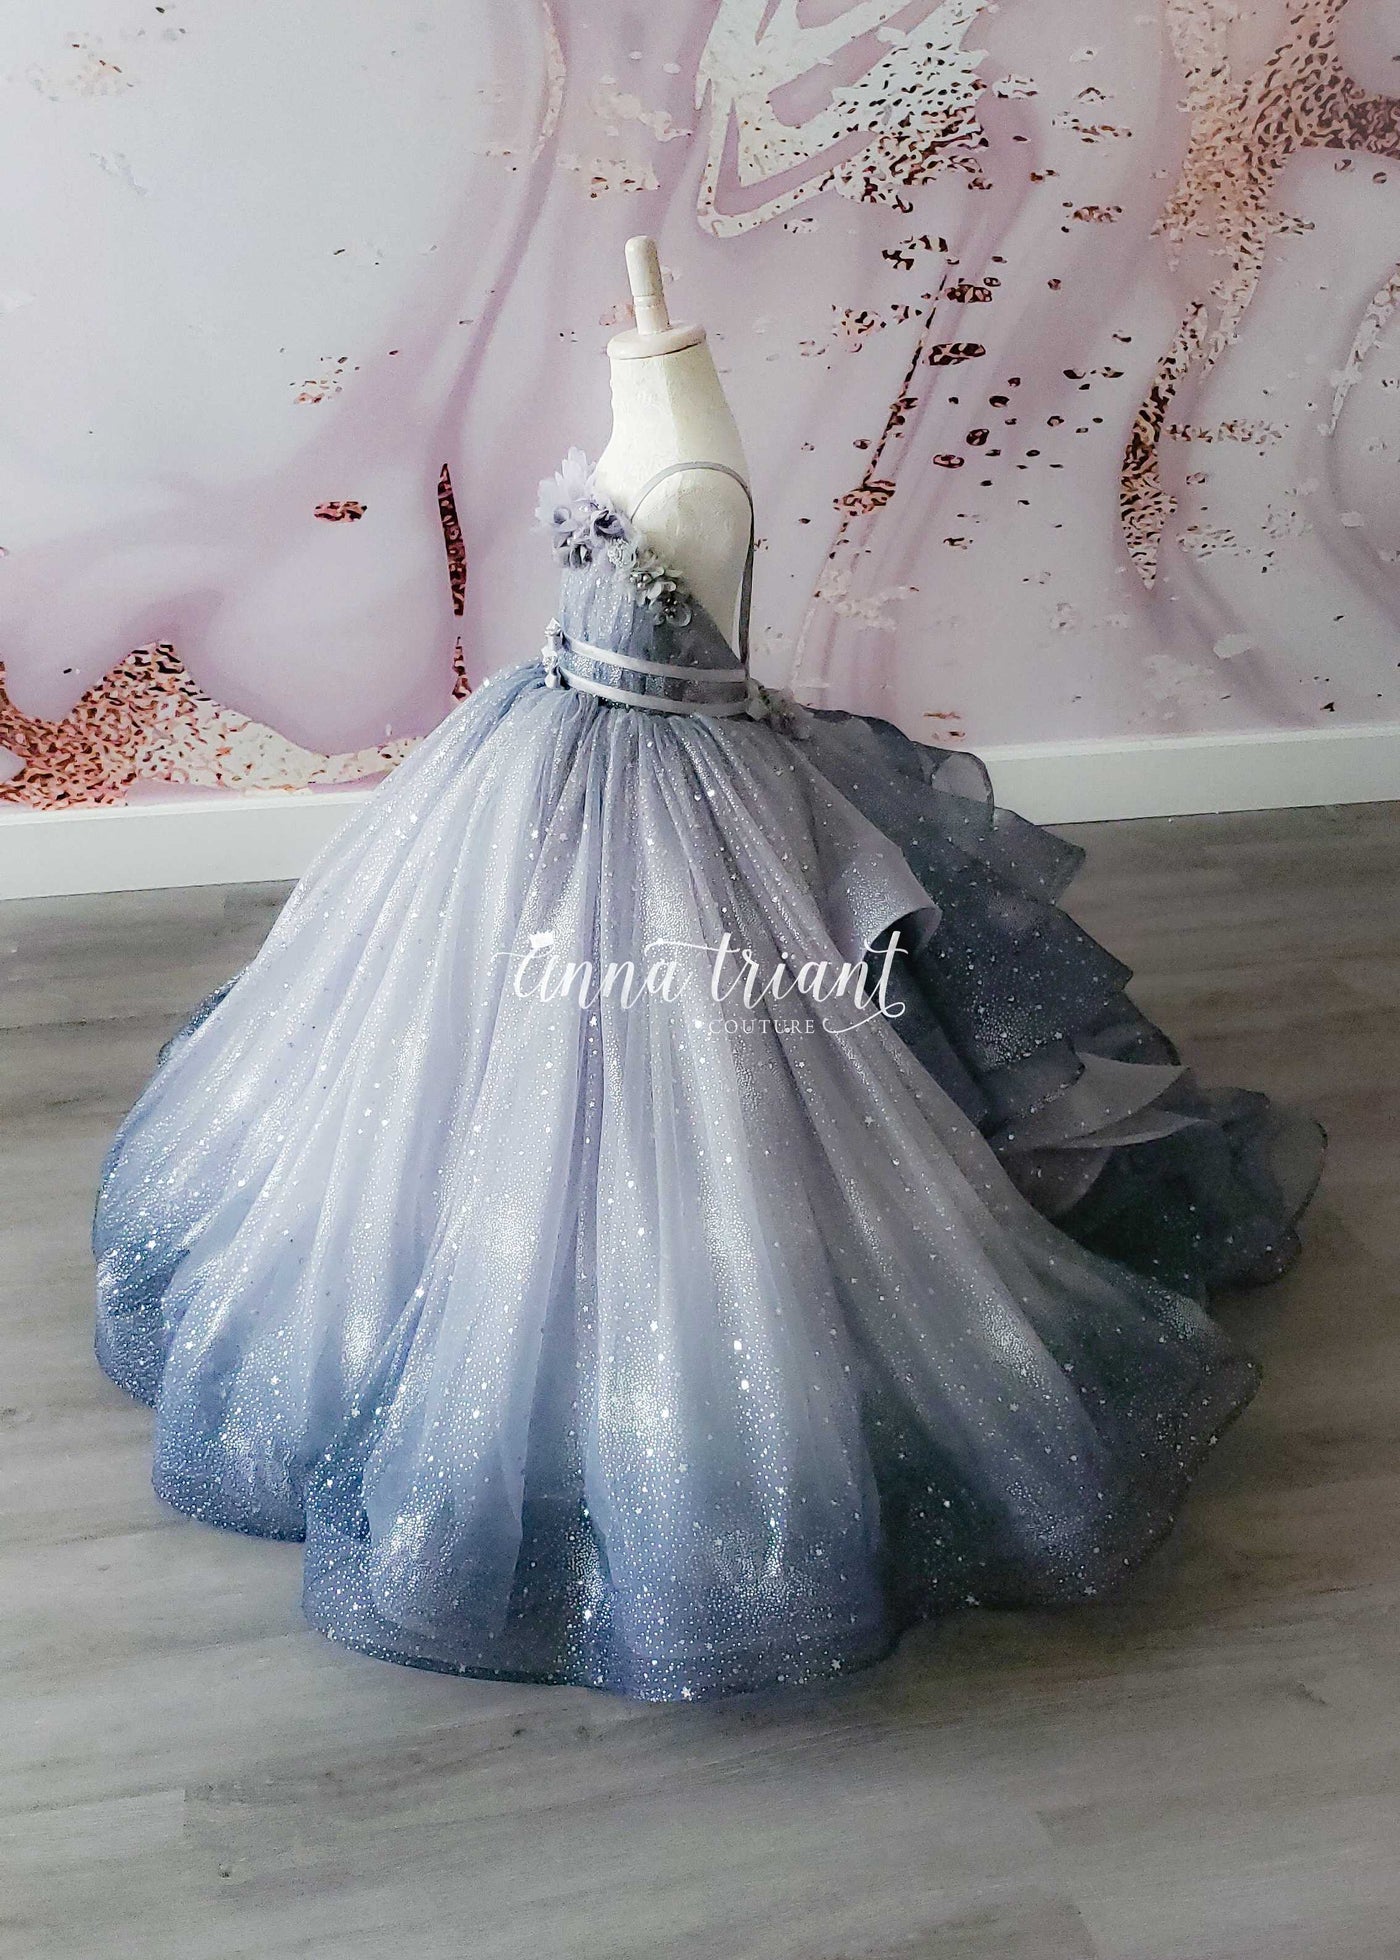 Dazzling Ombre Gown in Light Silver and Gray